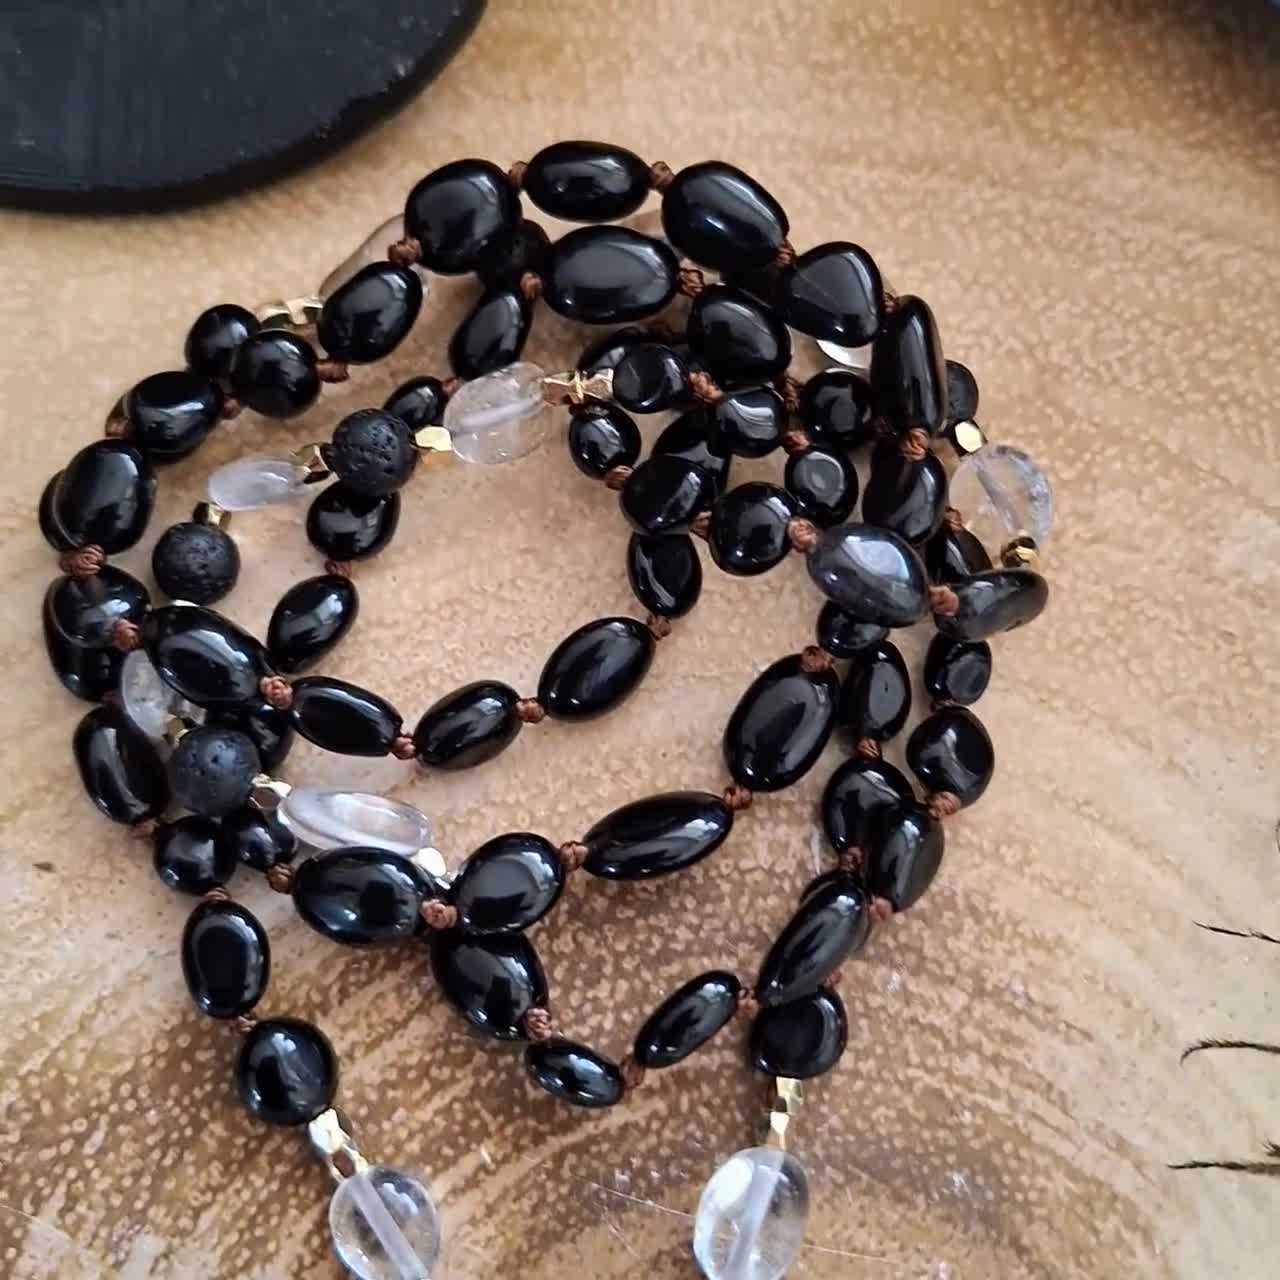 Buy Black Tourmaline and Clear Quartz Necklace Knotted Raw Tourmaline  Pendant Natural Stone Crystal Healing Jewellery Protection Amulet Online in  India 